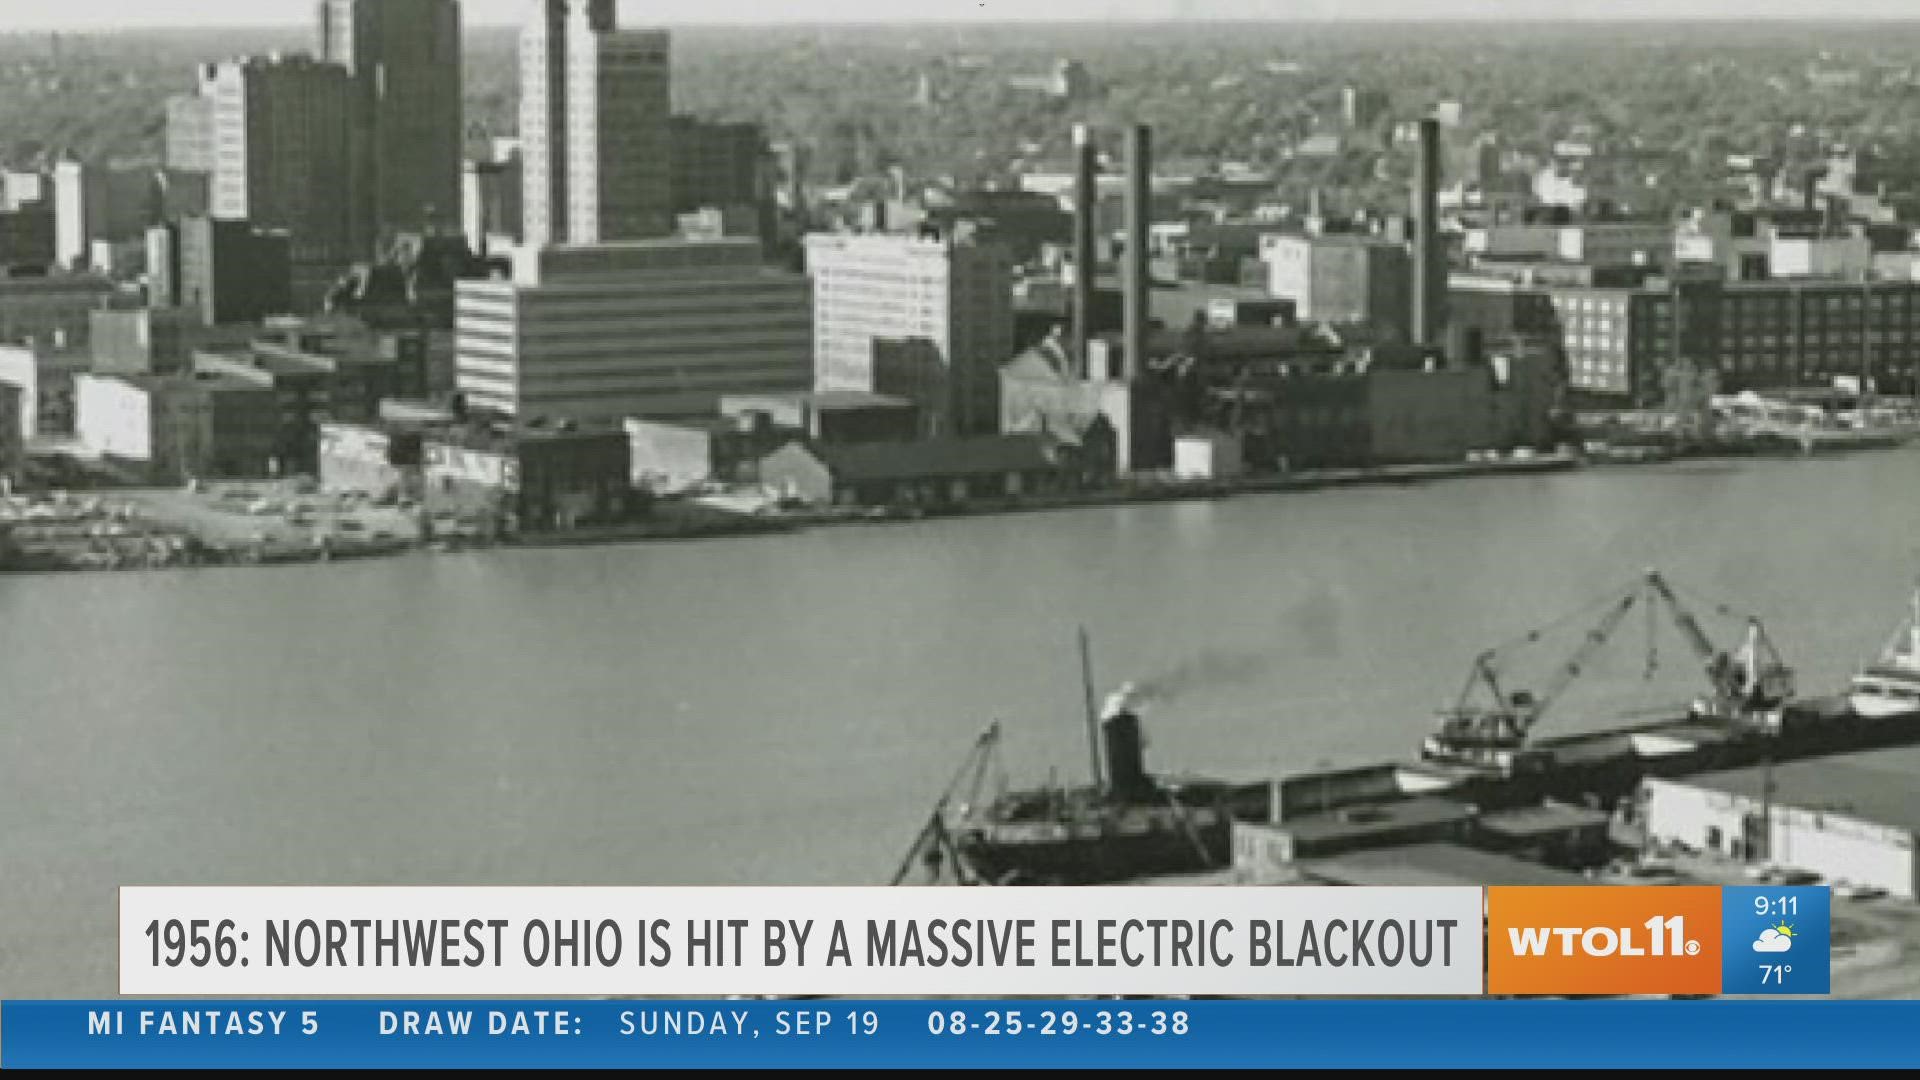 In 1956, Northwest Ohio is hit by a massive electric blackout and power is severed for 150 area communities.